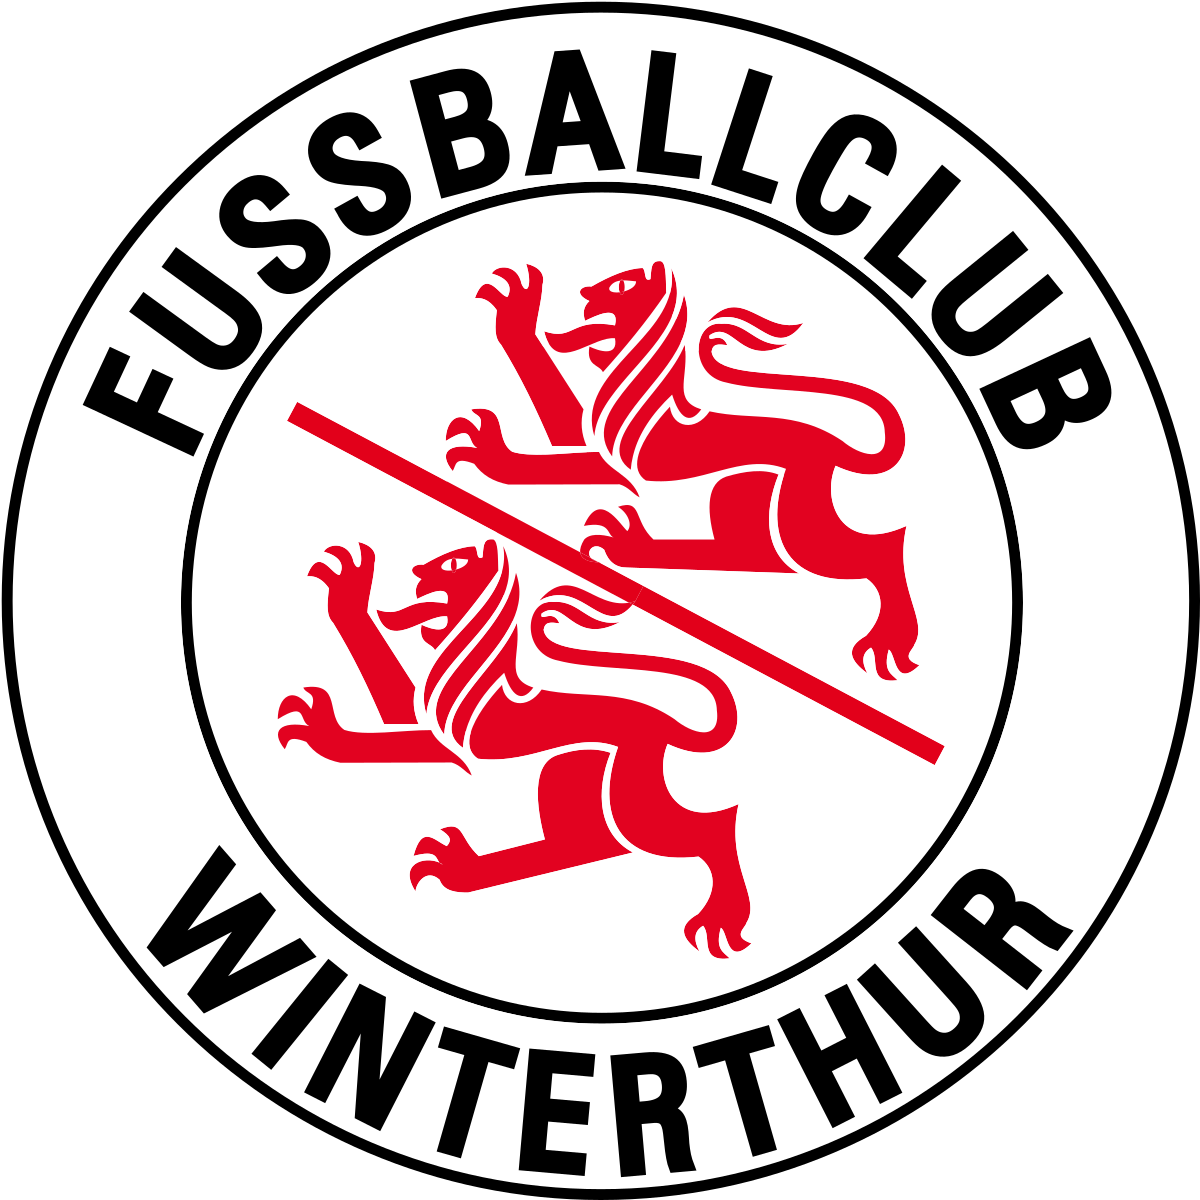 Young Boys vs Winterthur Prediction: Both teams looking to avoid another defeat